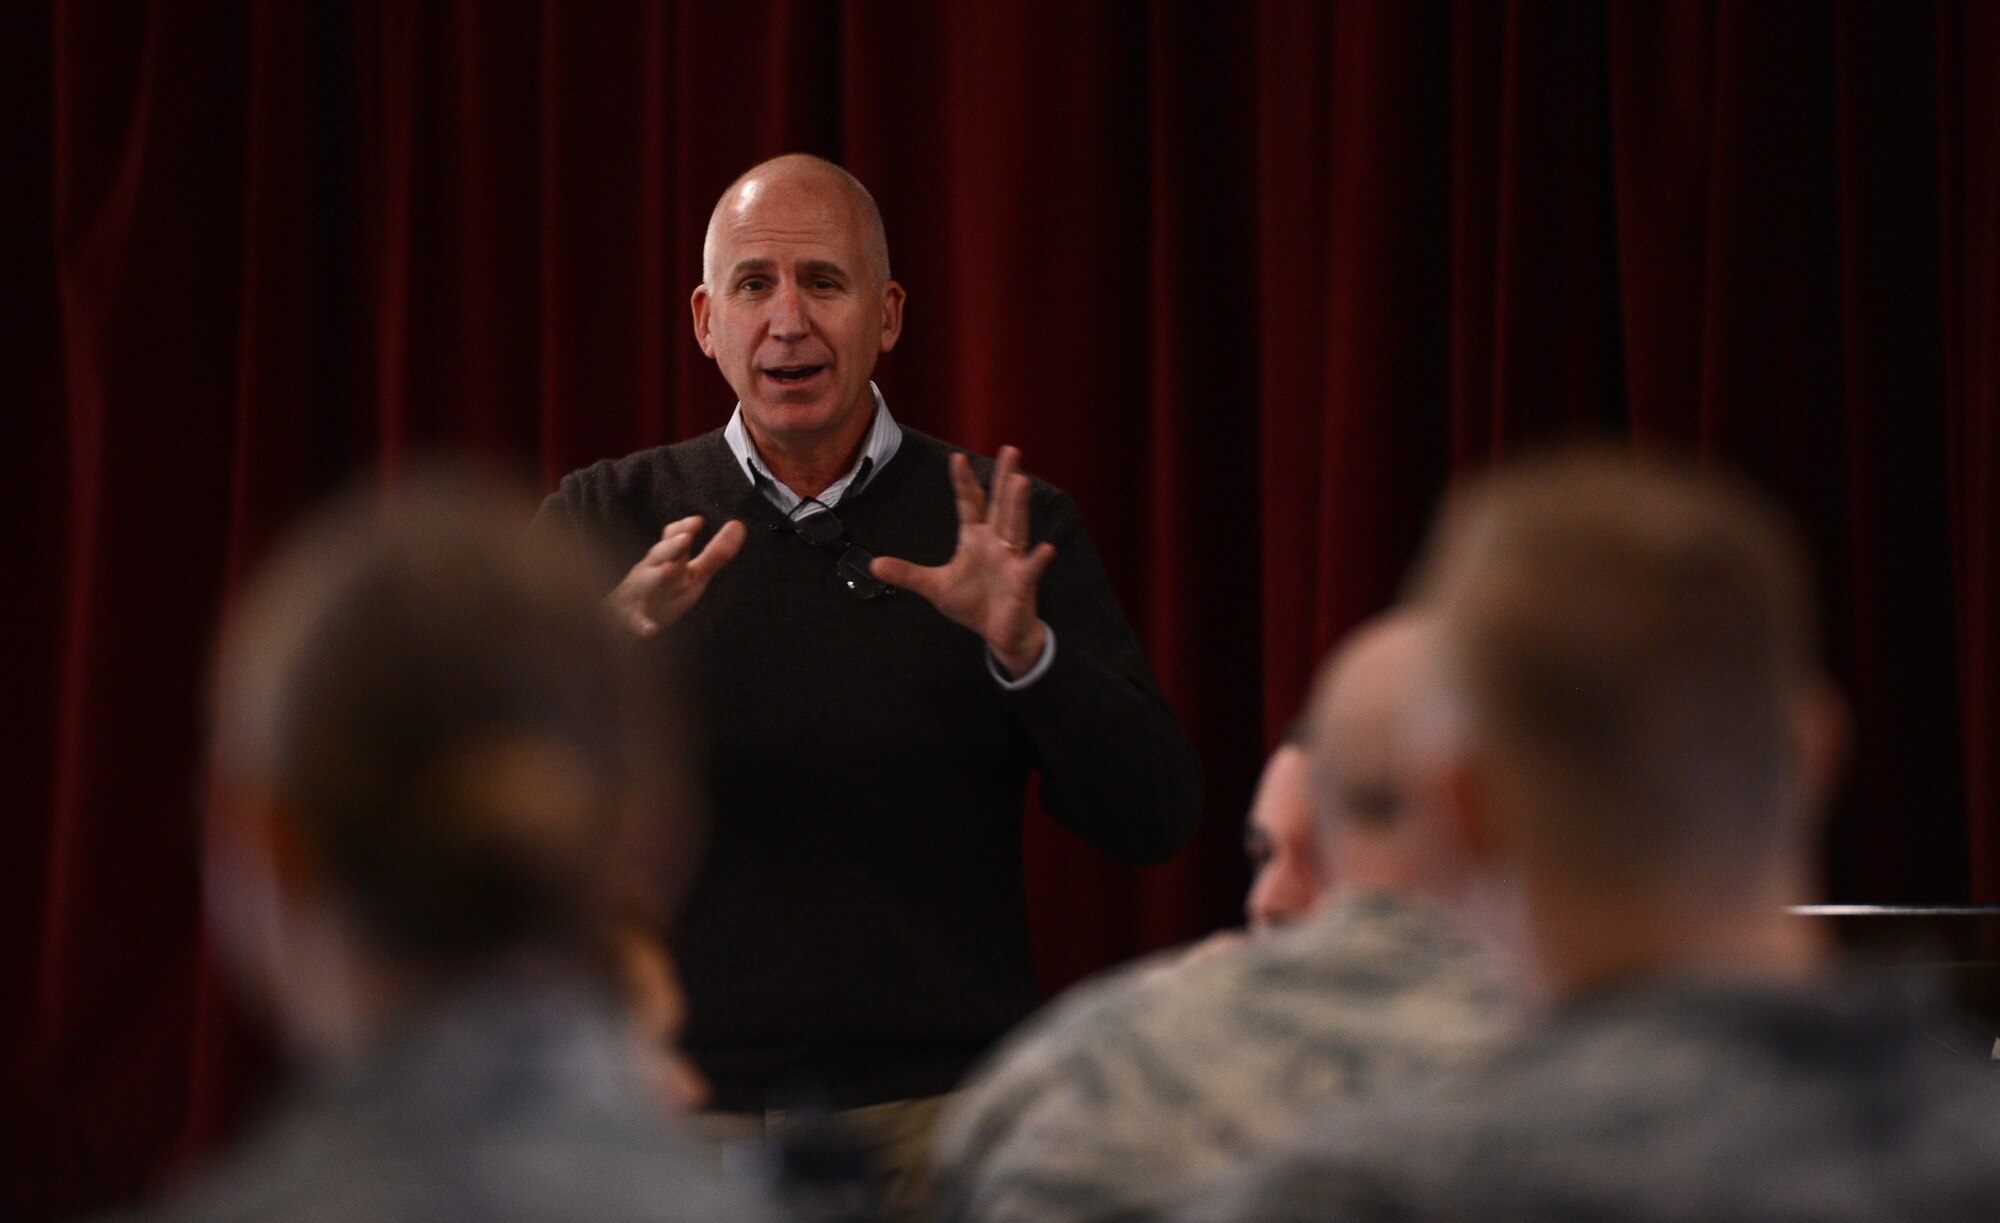 Retired Chief Master Sgt. Cary Hatzinger teaches leadership principles at a Lunch and Leadership Lecture Nov. 4, 2016, at Joint Base Lewis-McChord, Wash. The next Lunch and Leadership Lecture is scheduled for Friday Dec. 2 at the McChord Chapel Support Center. (U.S. Air Force photo/Senior Airman Jacob Jimenez) 